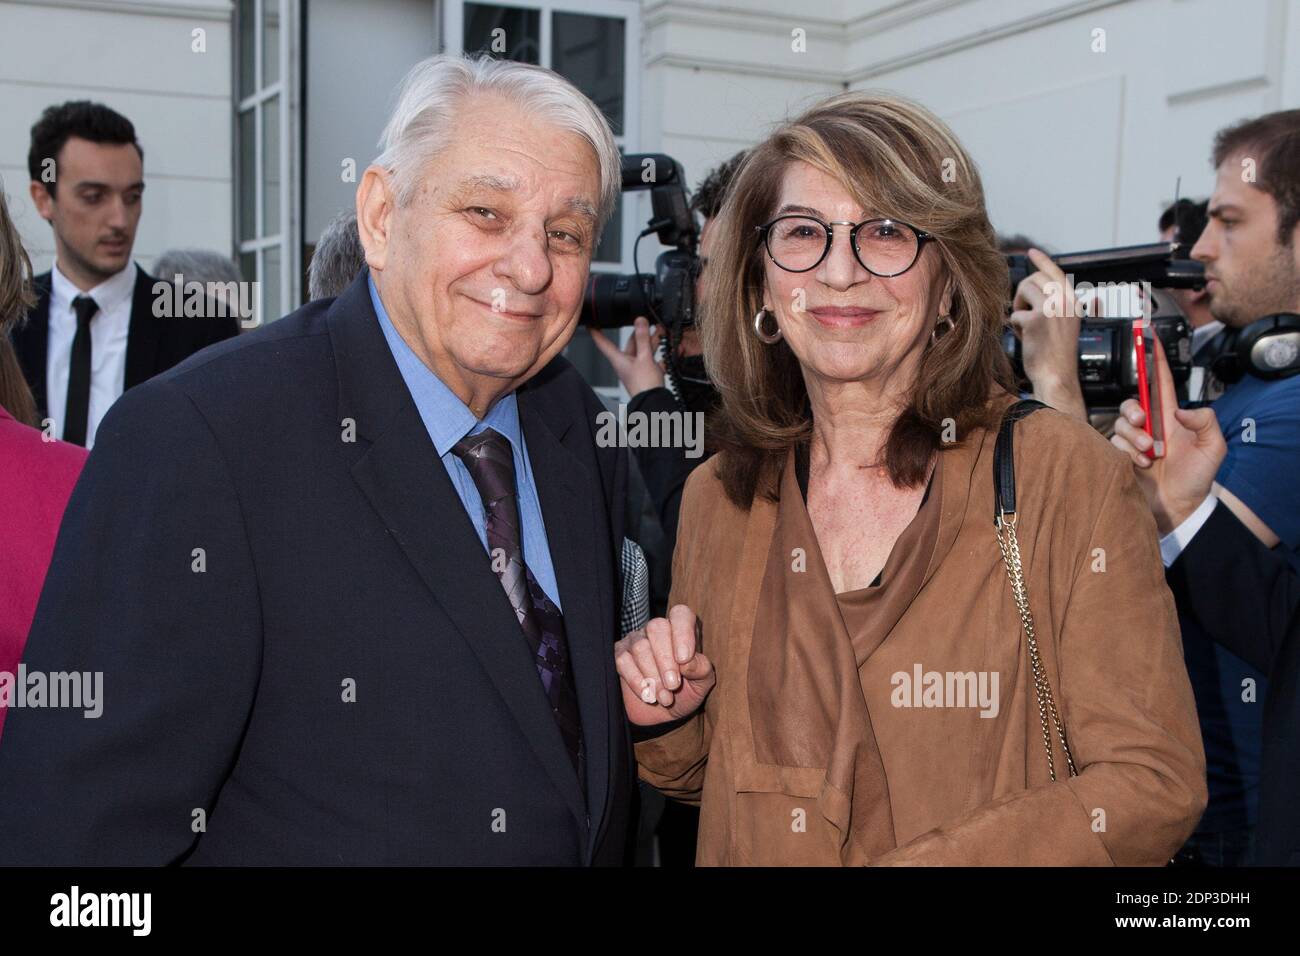 Henri Guybet attending the 5th Birthday Party of Museum Paul Belmondo in Boulogne Billancourt, France, on April 13, 2015. Photo by Audrey Poree/ ABACAPRESS.COM Stock Photo